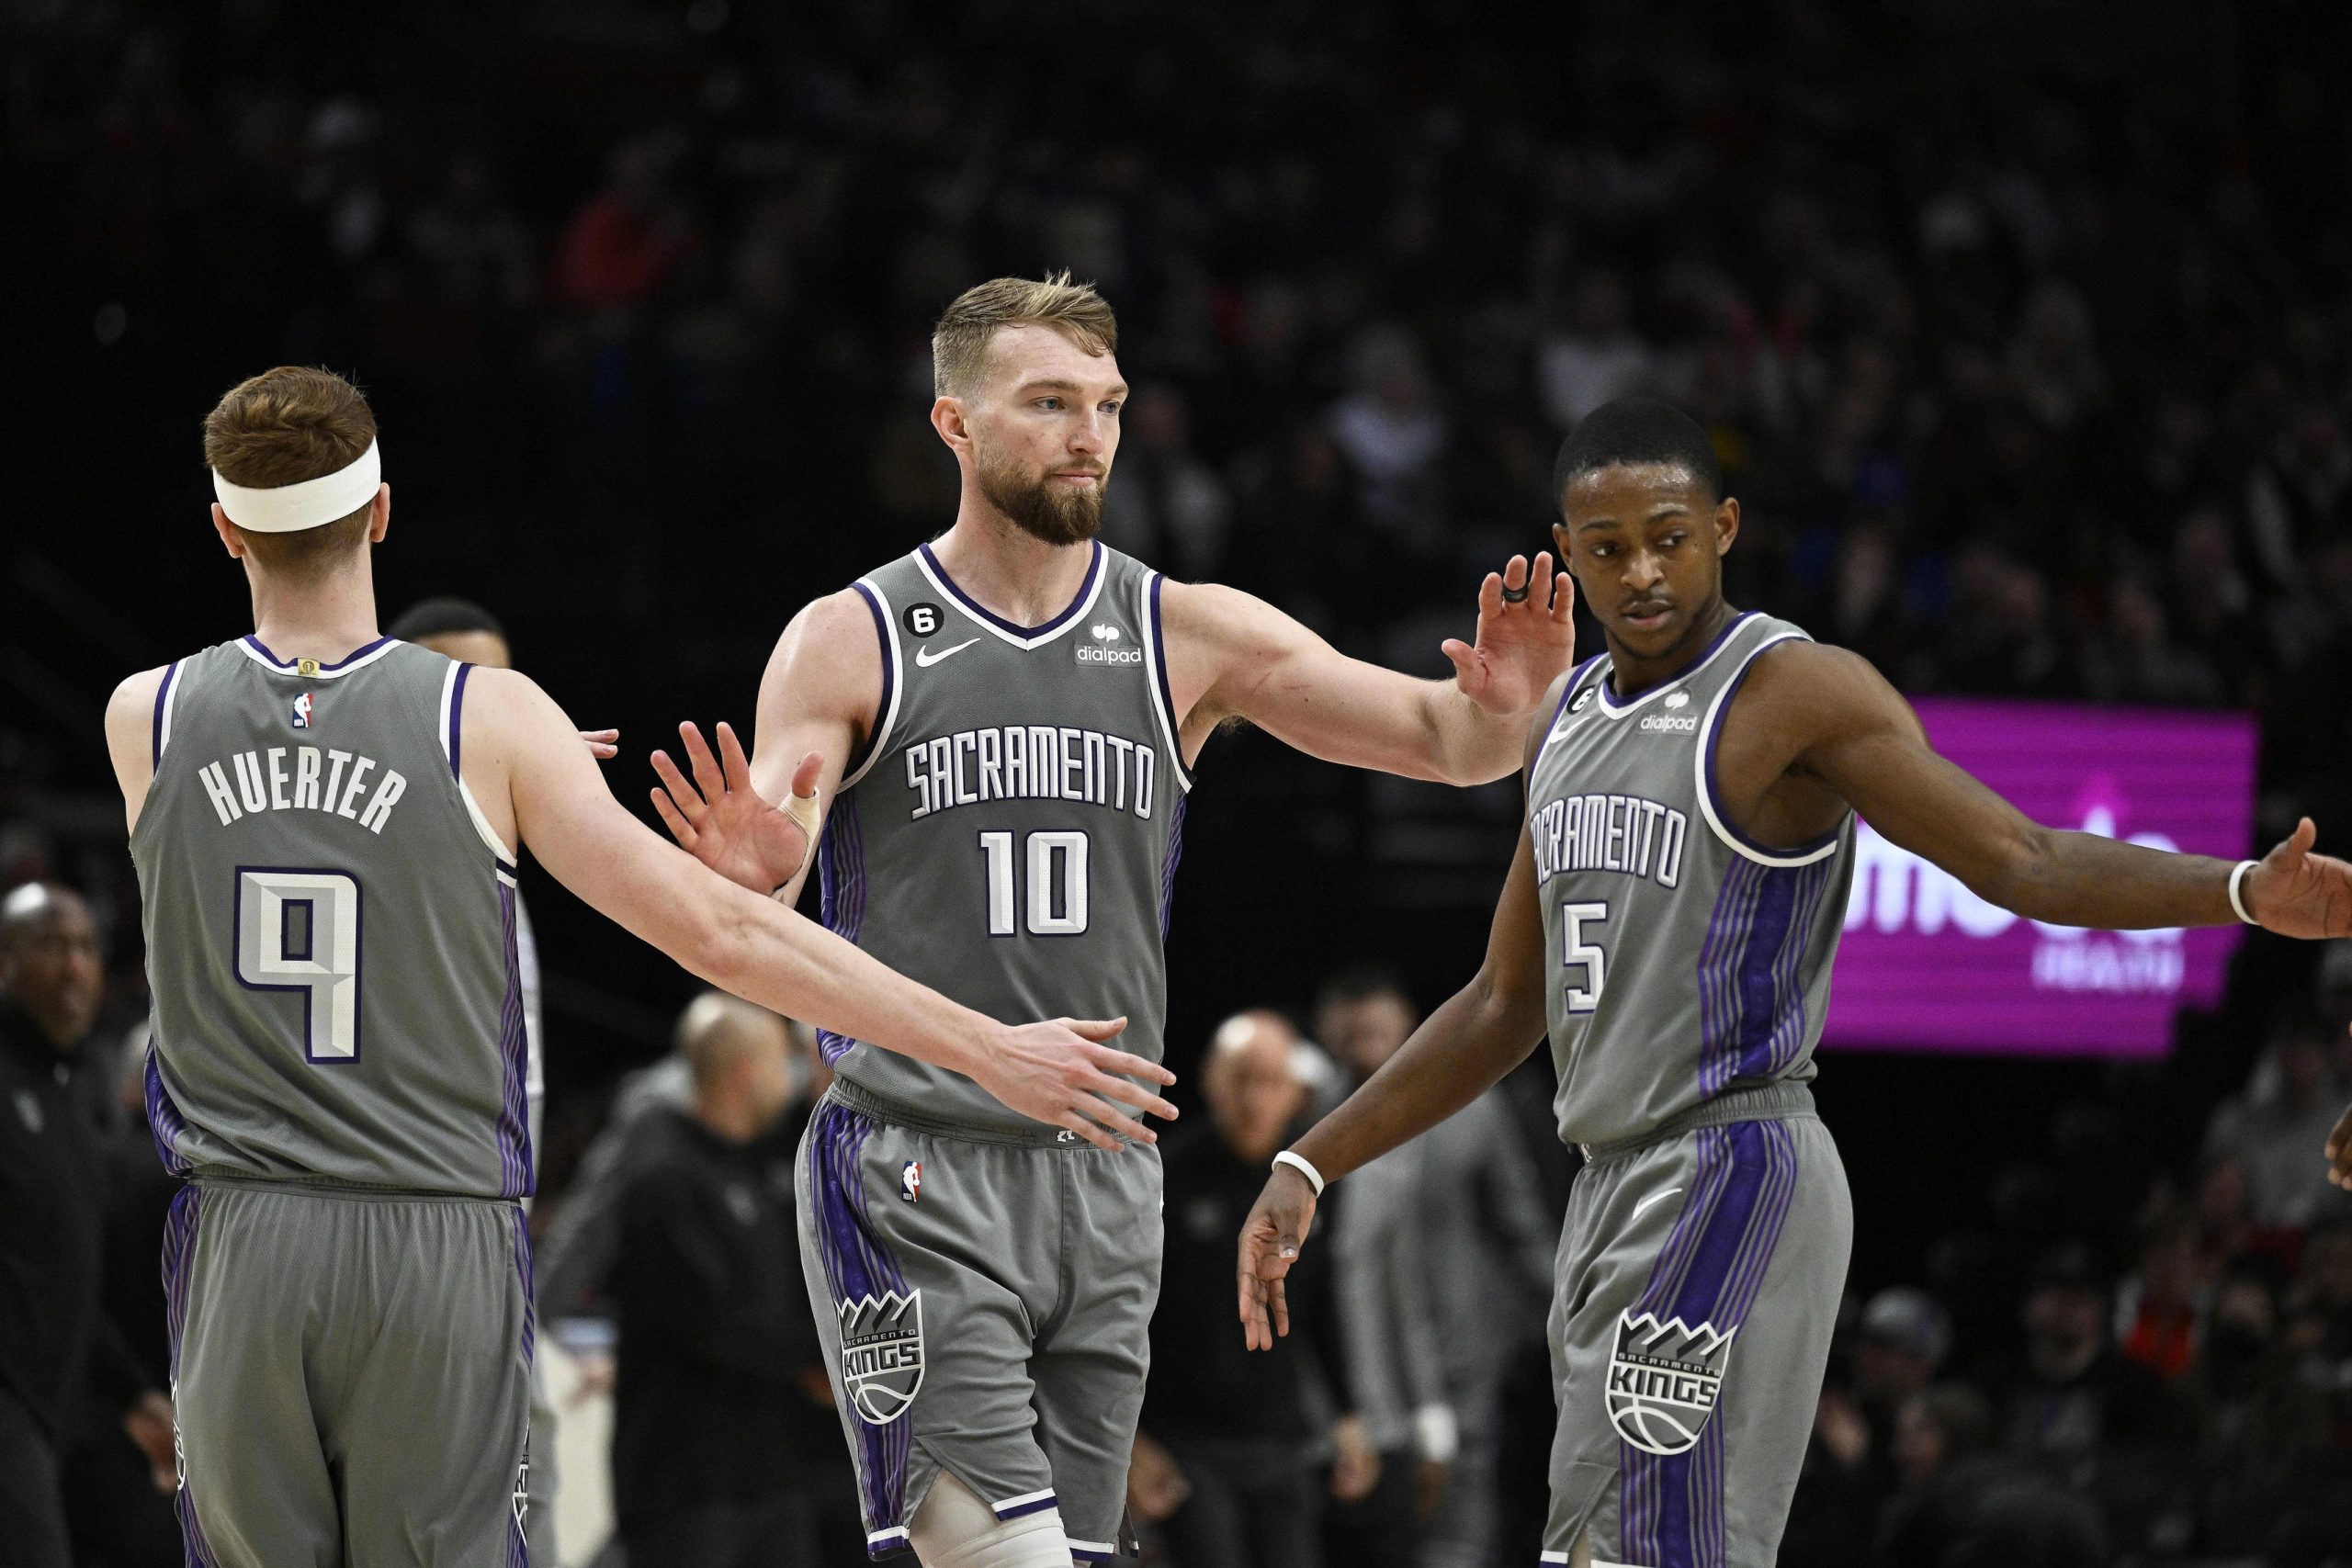 Mar 29, 2023; Portland, Oregon, USA; Sacramento Kings guard Kevin Huerter (9), forward Domantas Sabonis (10), and guard De'Aaron Fox (5) high-five each other during a time out in the second half against the Portland Trail Blazers at Moda Center. Mandatory Credit: Troy Wayrynen-USA TODAY Sports